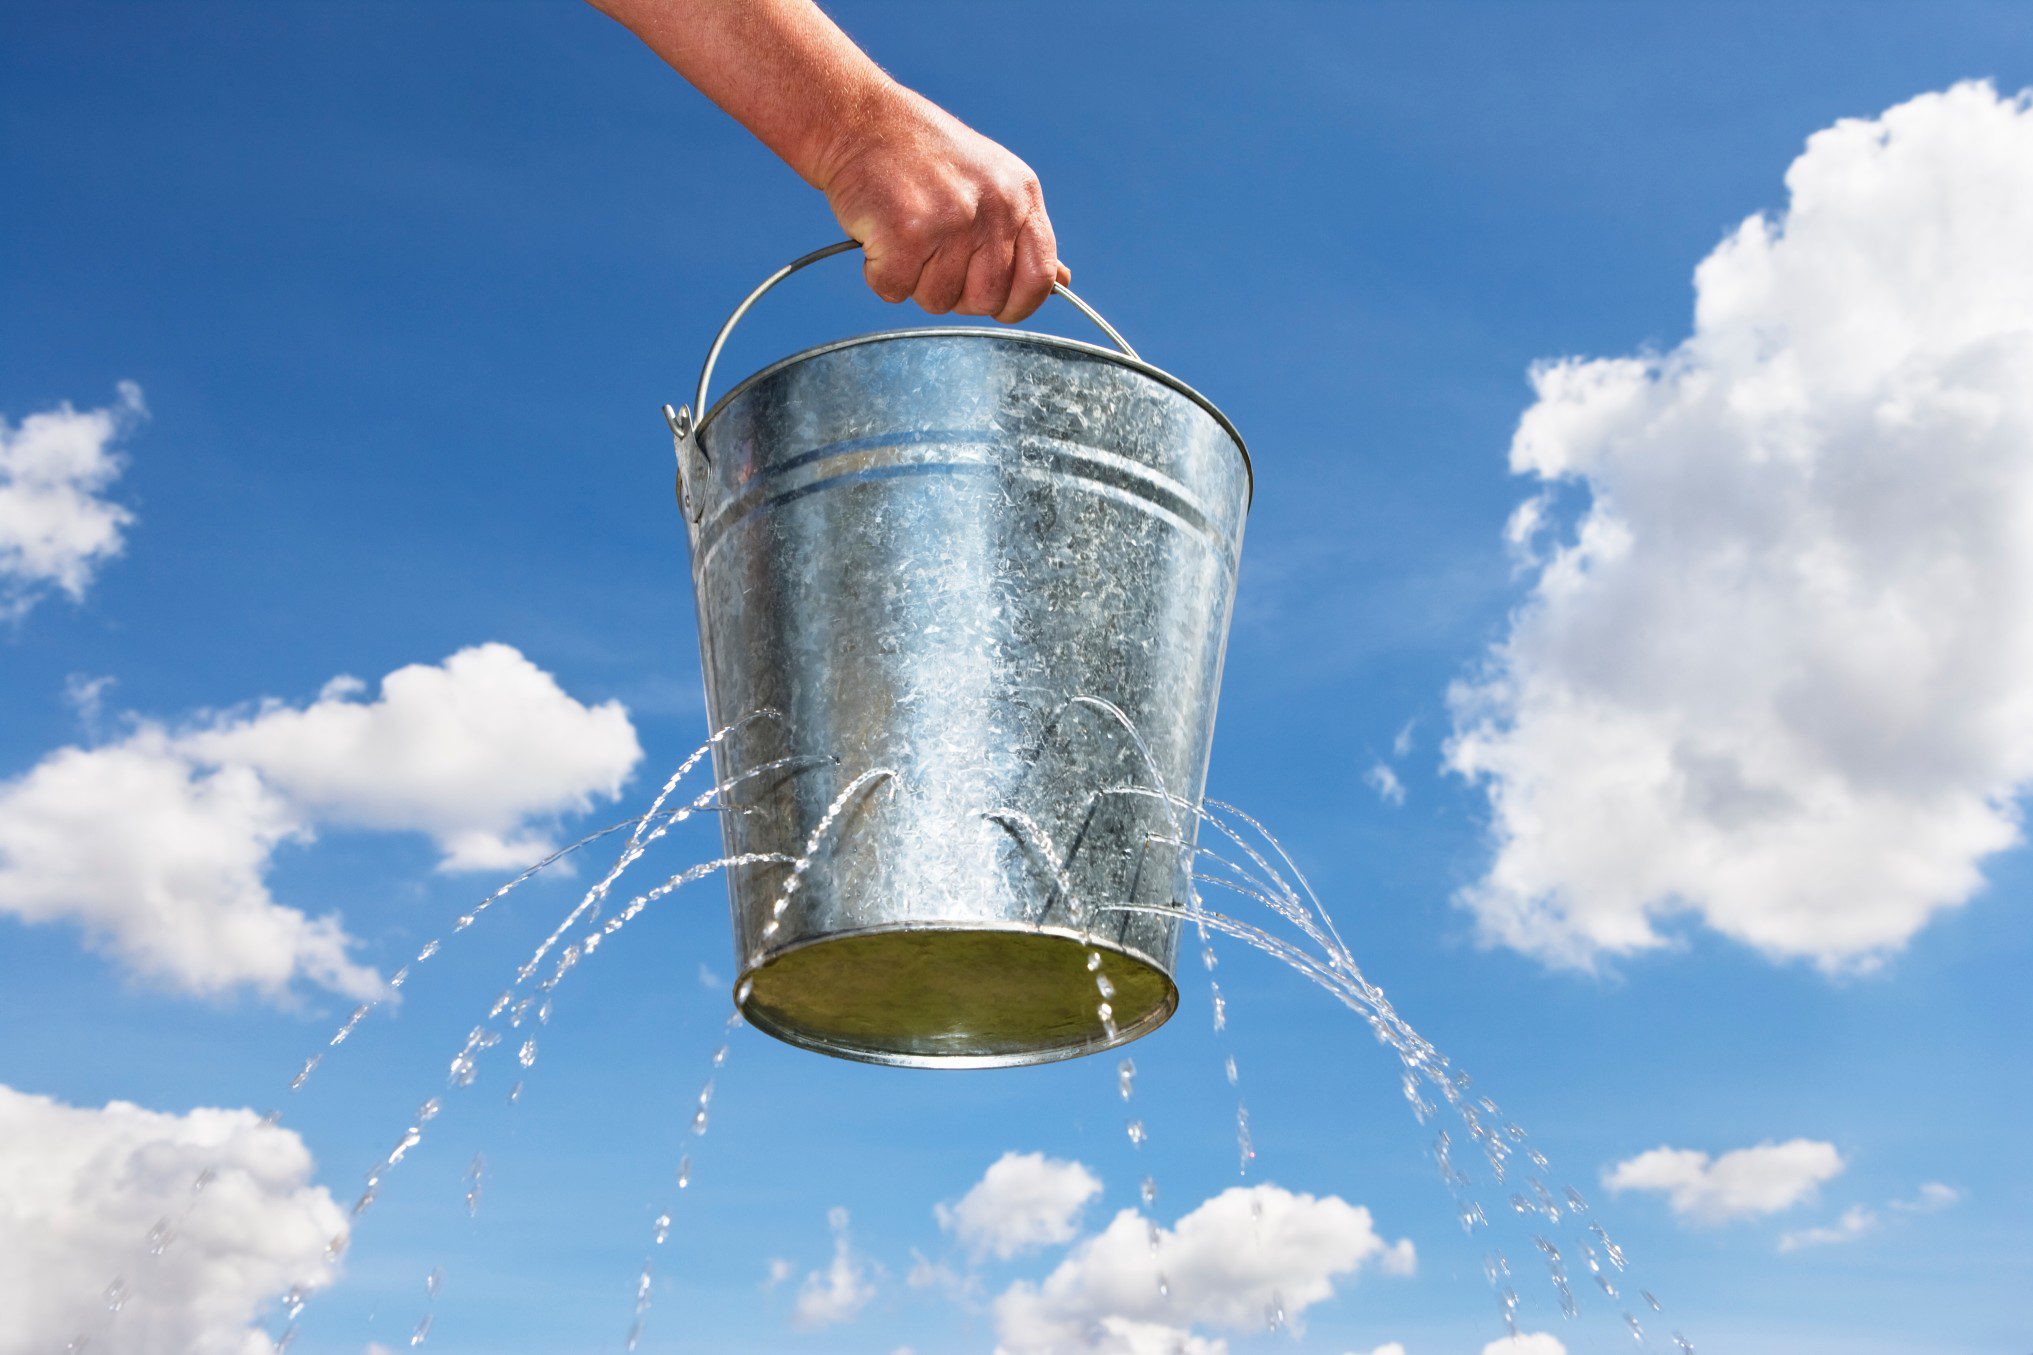 man-holding-bucket-with-holes-leaking-water_t20_0xZNjo